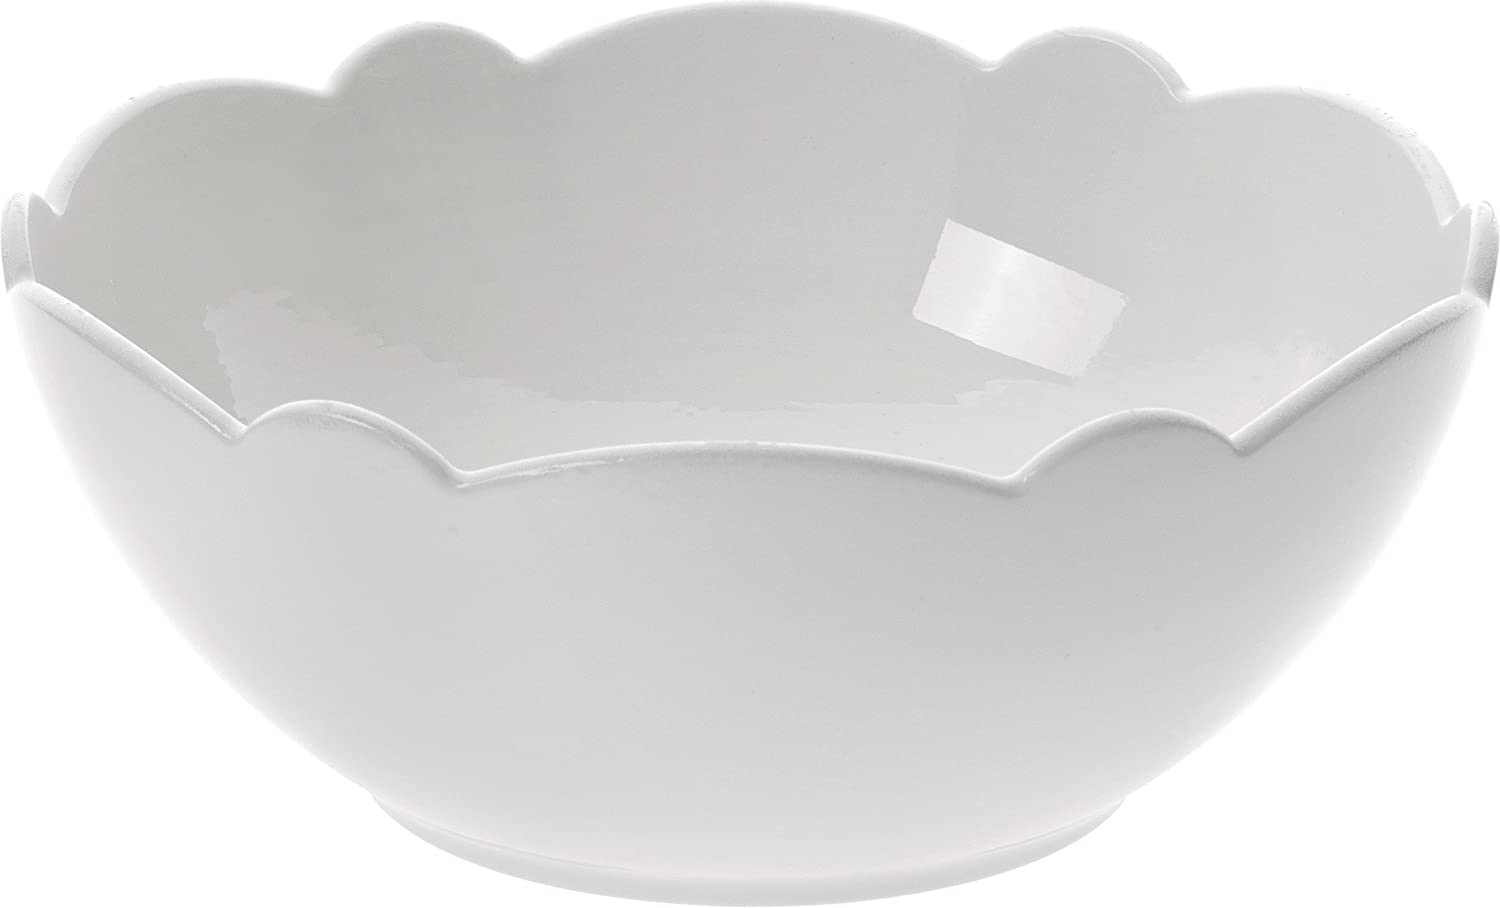 Alessi Dressed Porcelain Bowl with Relief Decoration, White - Set of 4